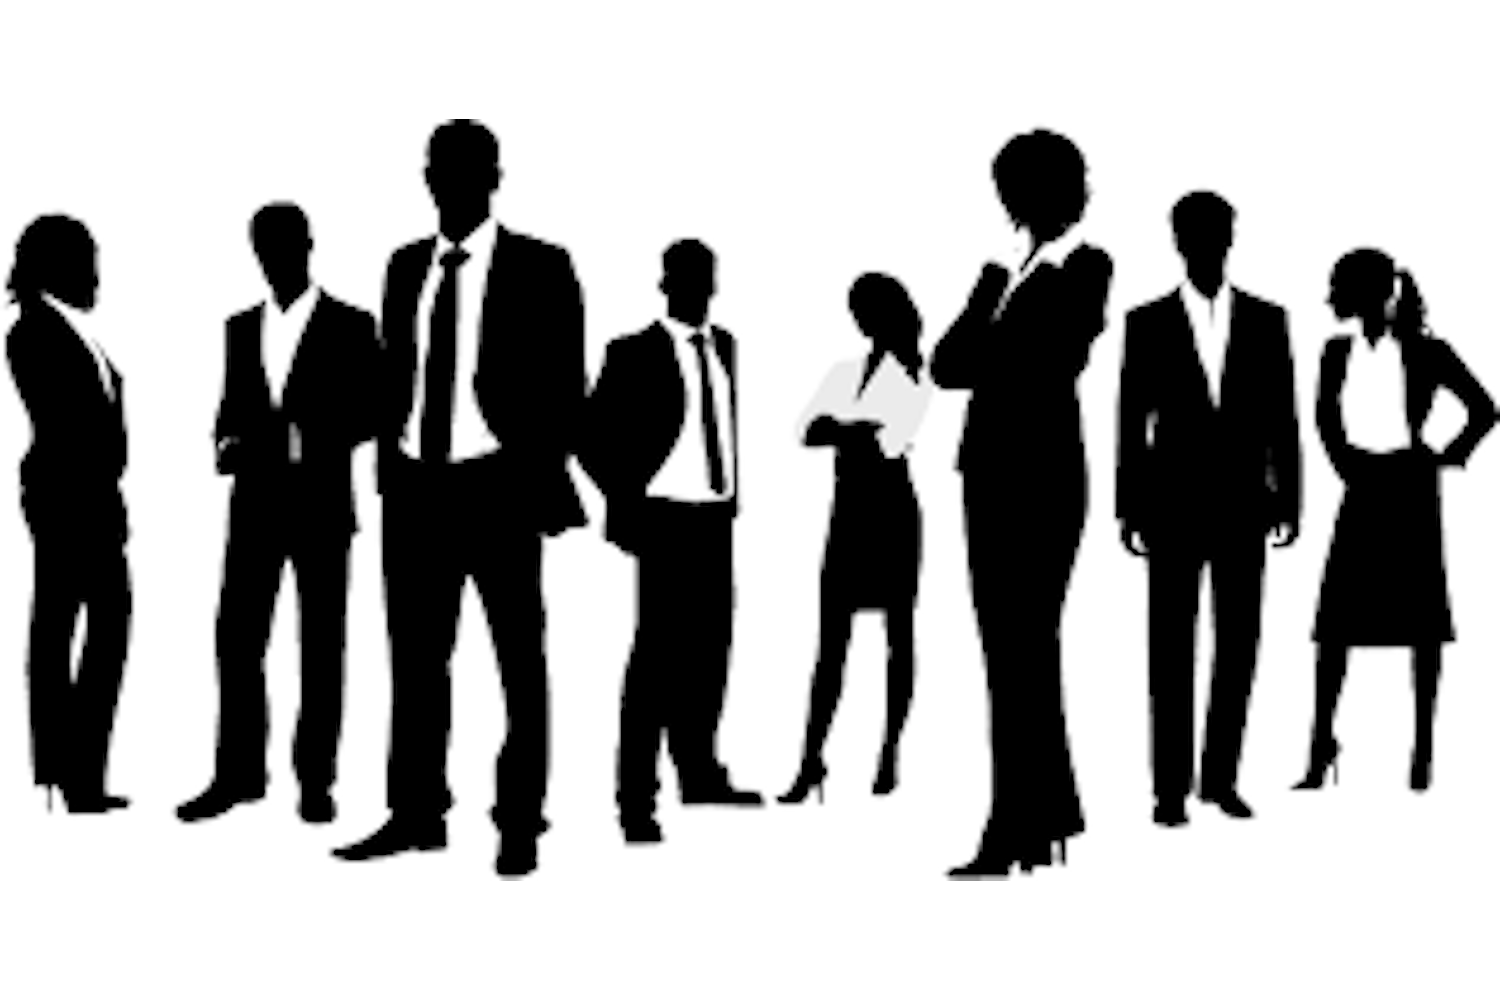 Silhouettes of business people. 